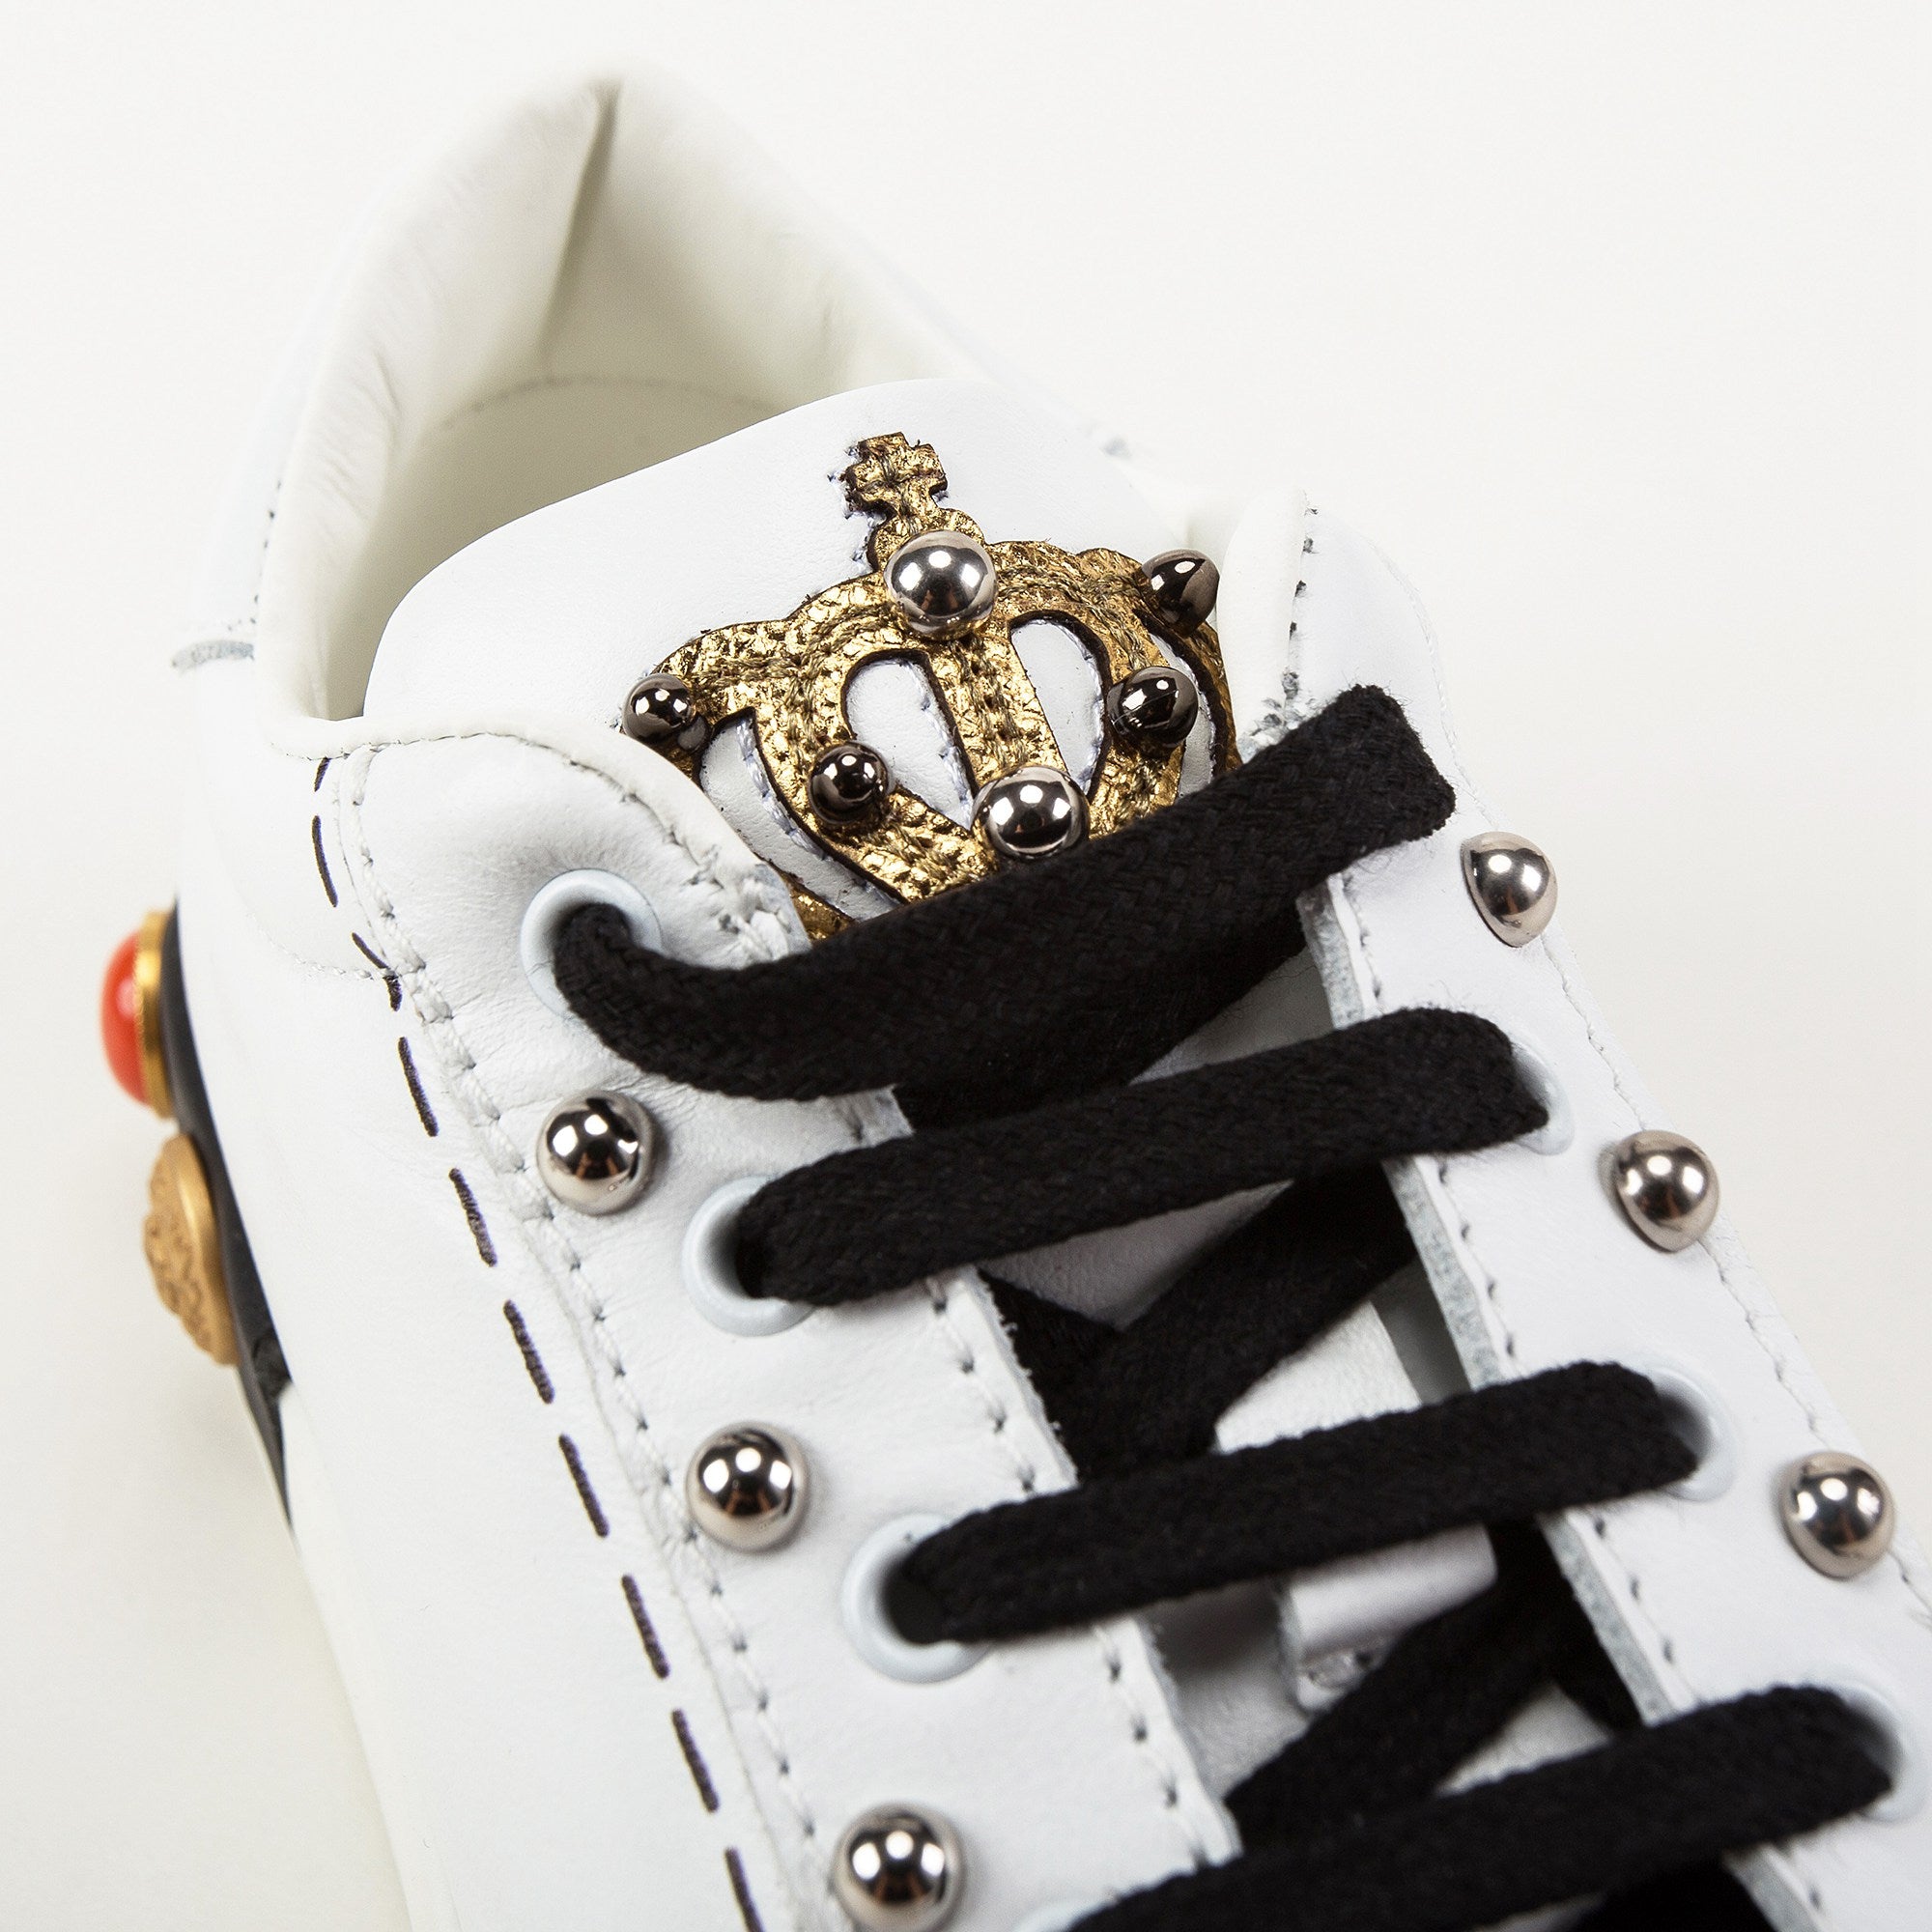 Girls White Leather Trainers With Crown Trim